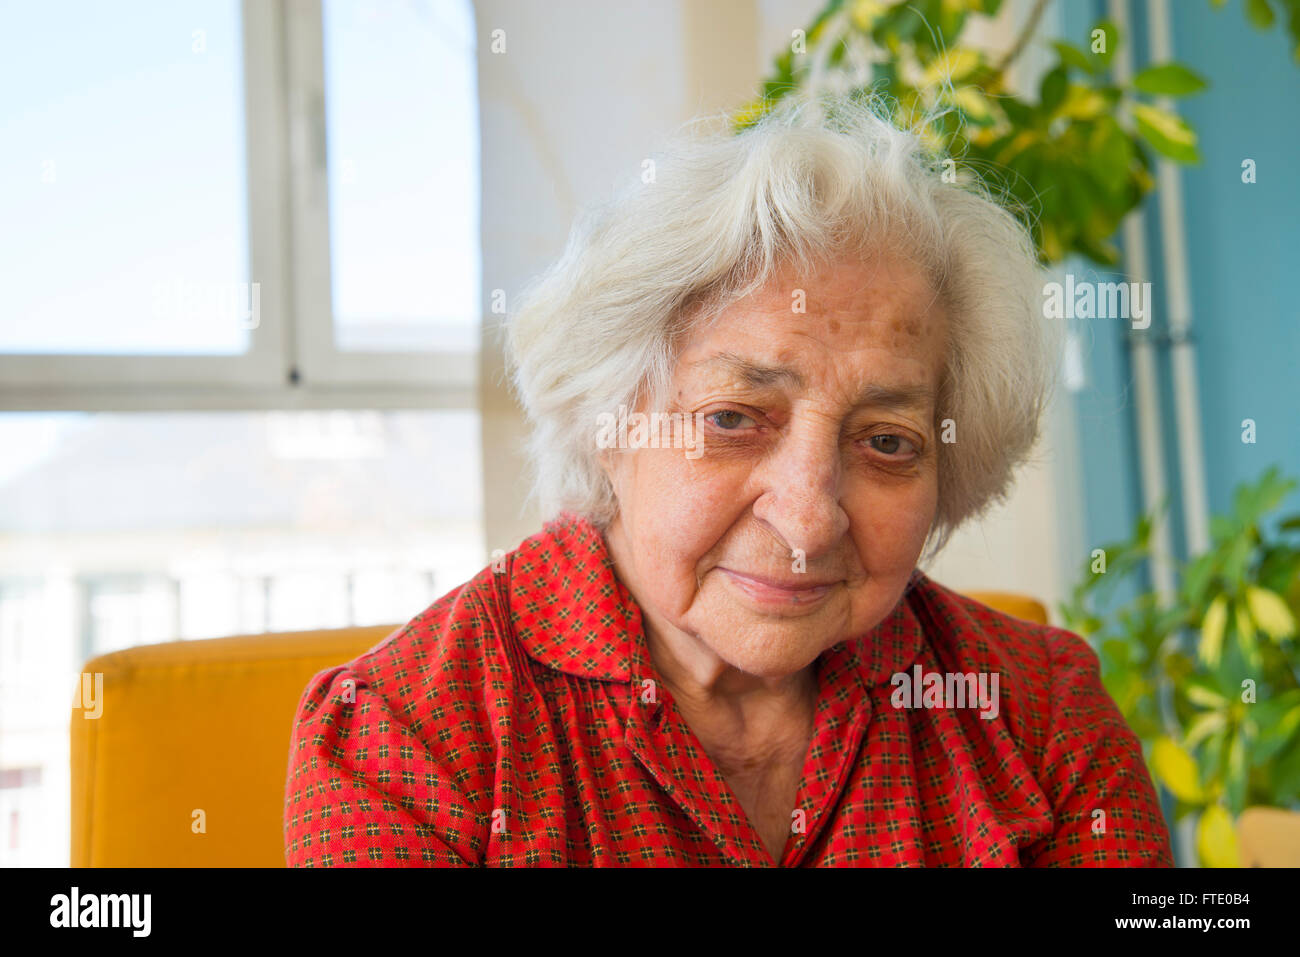 Portrait of old lady in a nursing home, smiling and looking at the camera. Stock Photo